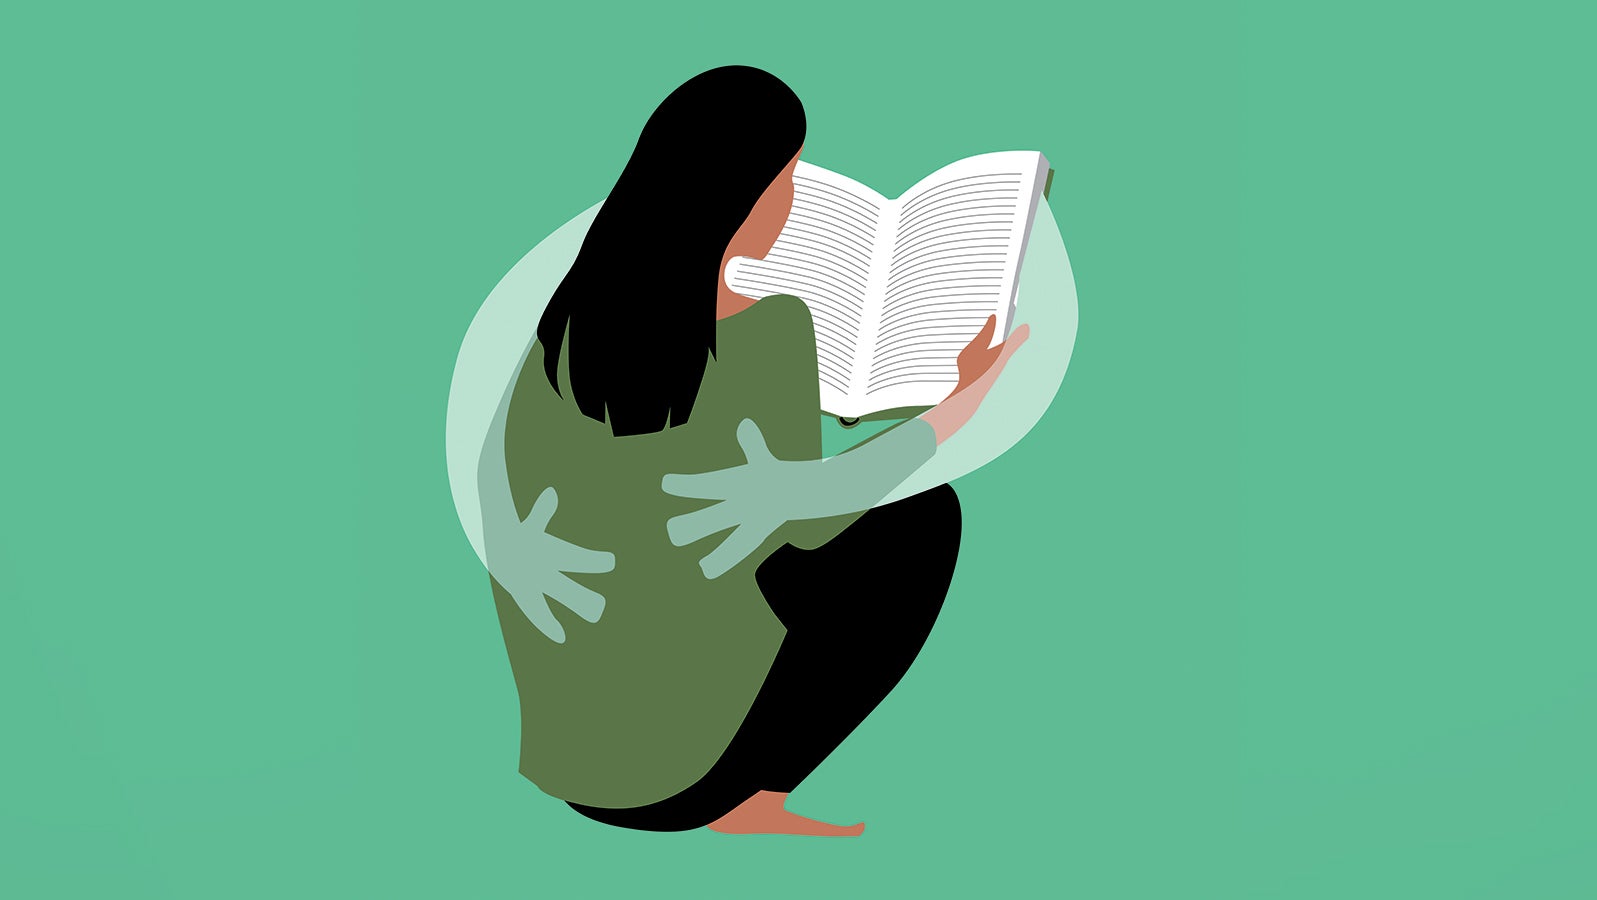 Illustration of a woman reading a book that is embracing her